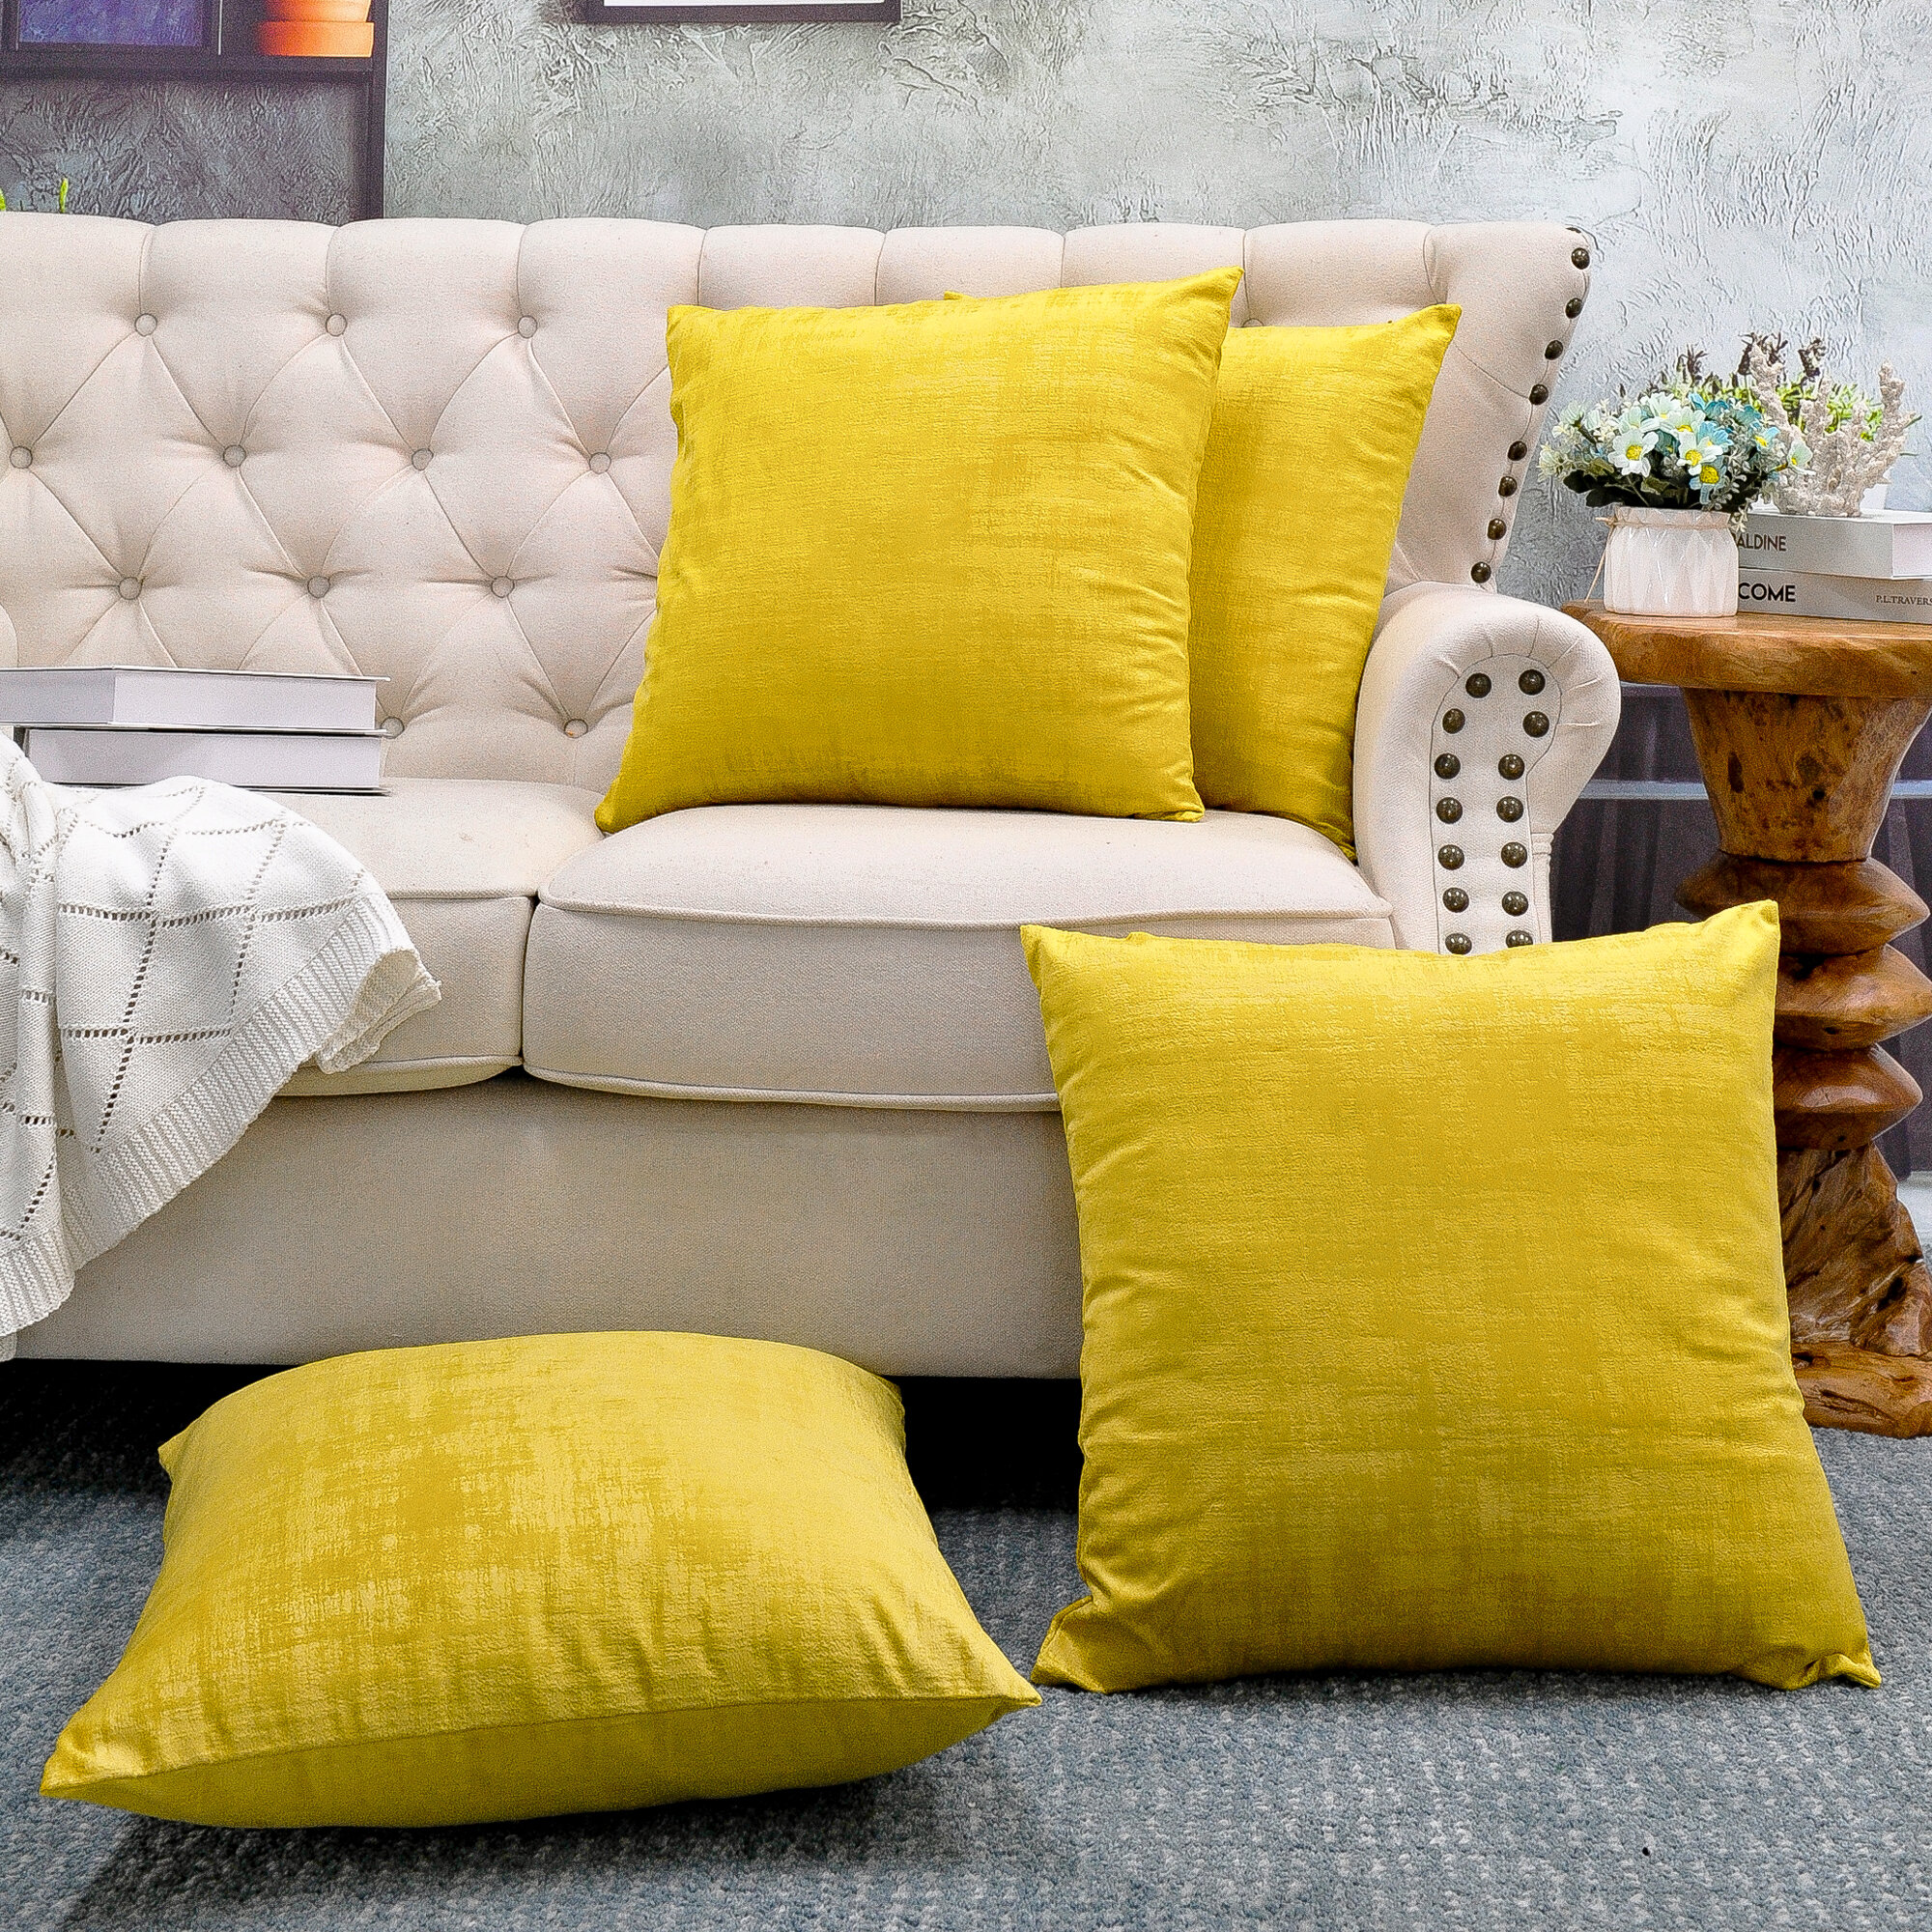 Mustard Yellow Decor Pillow Covers Outdoor Throw Pillowcases 18x18 Embroidered Square Cushion Covers for Holiday Sofa Room Bed Farmhouse 2 Pcs 